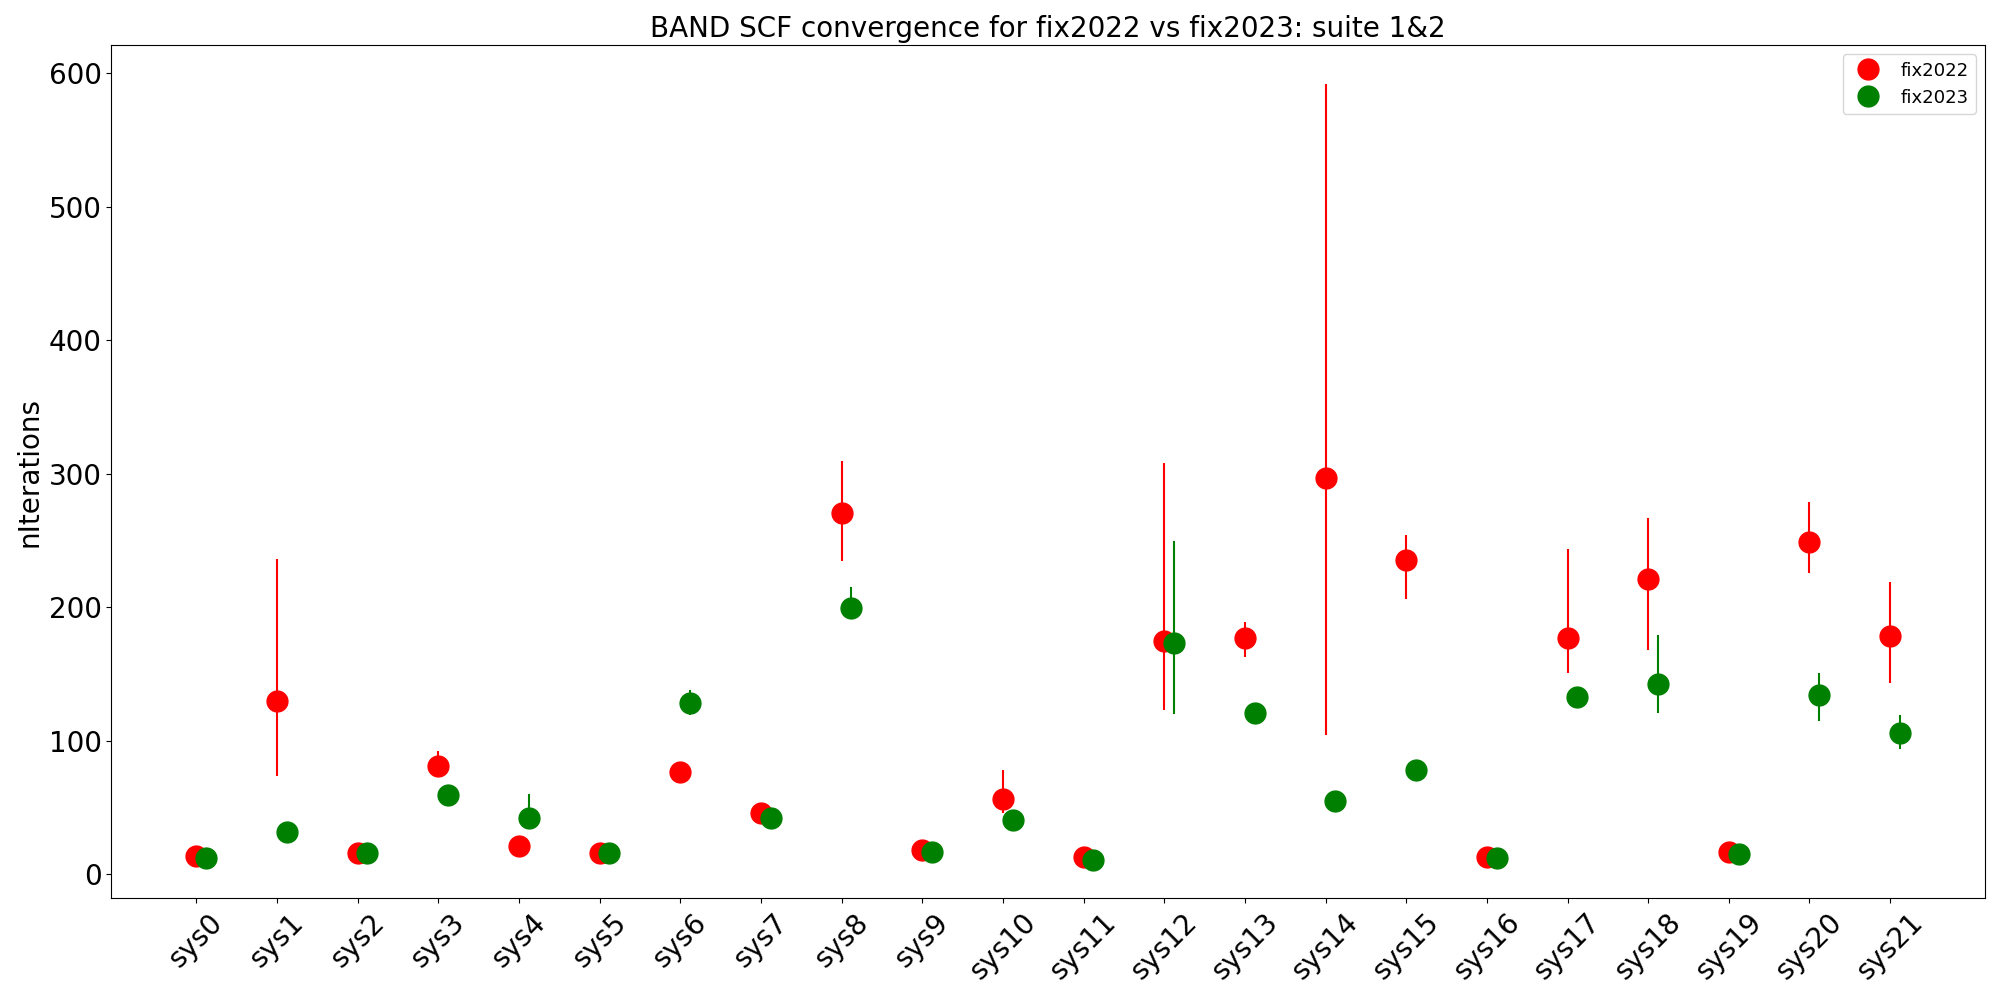 ../_images/bandconvergence1and2fix2022vsfix2023.png